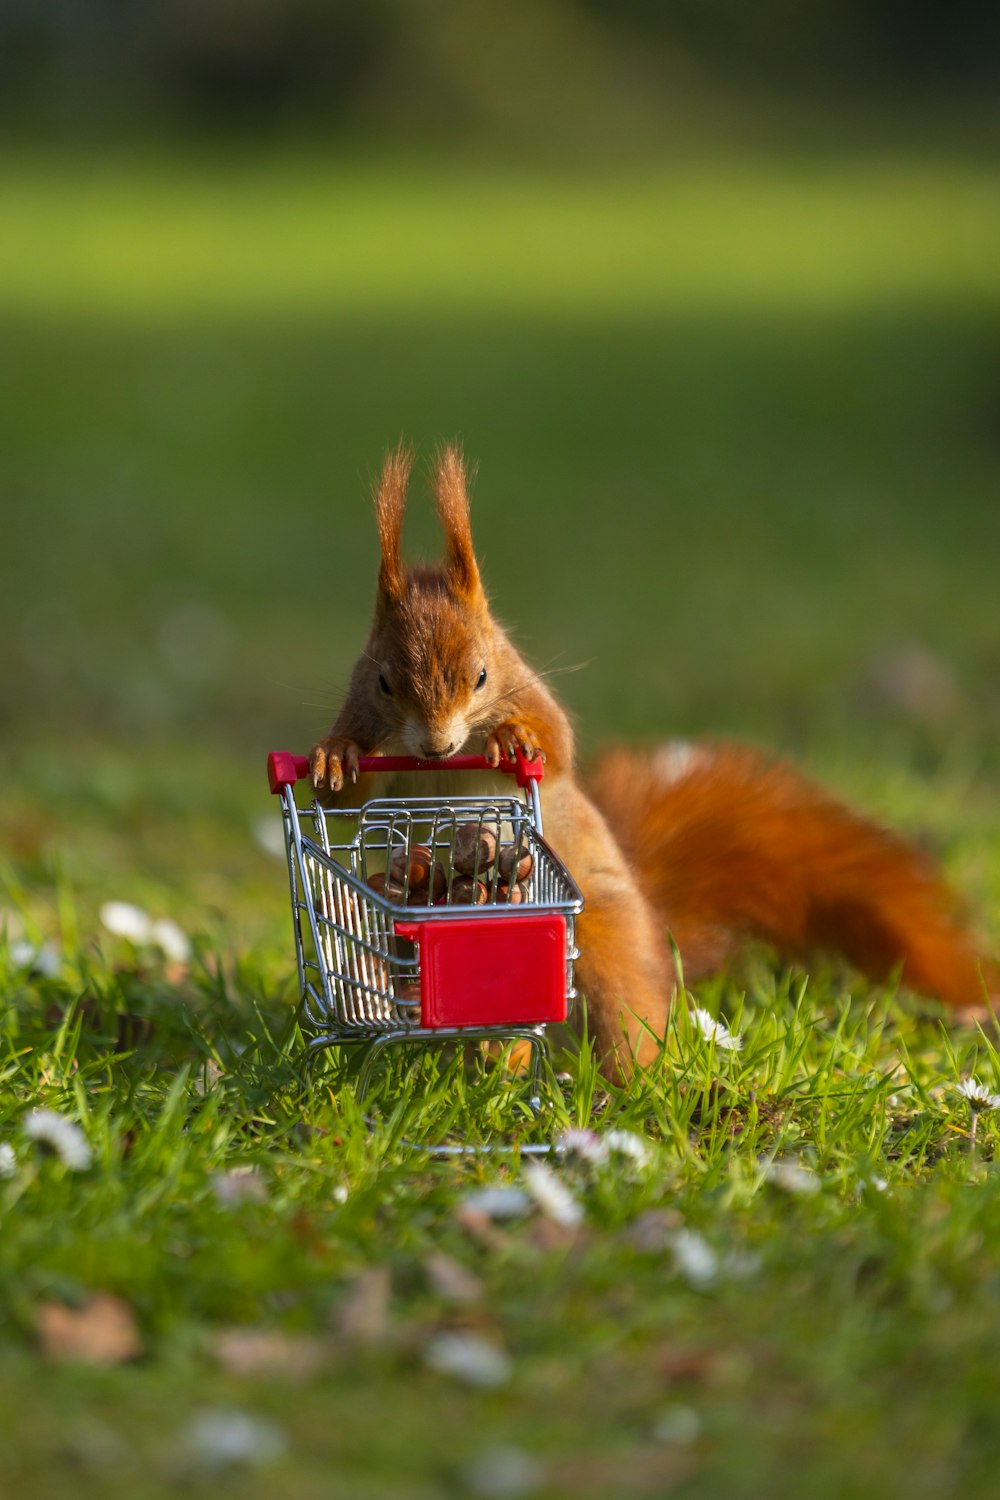 a squirrel is sitting in a shopping basket